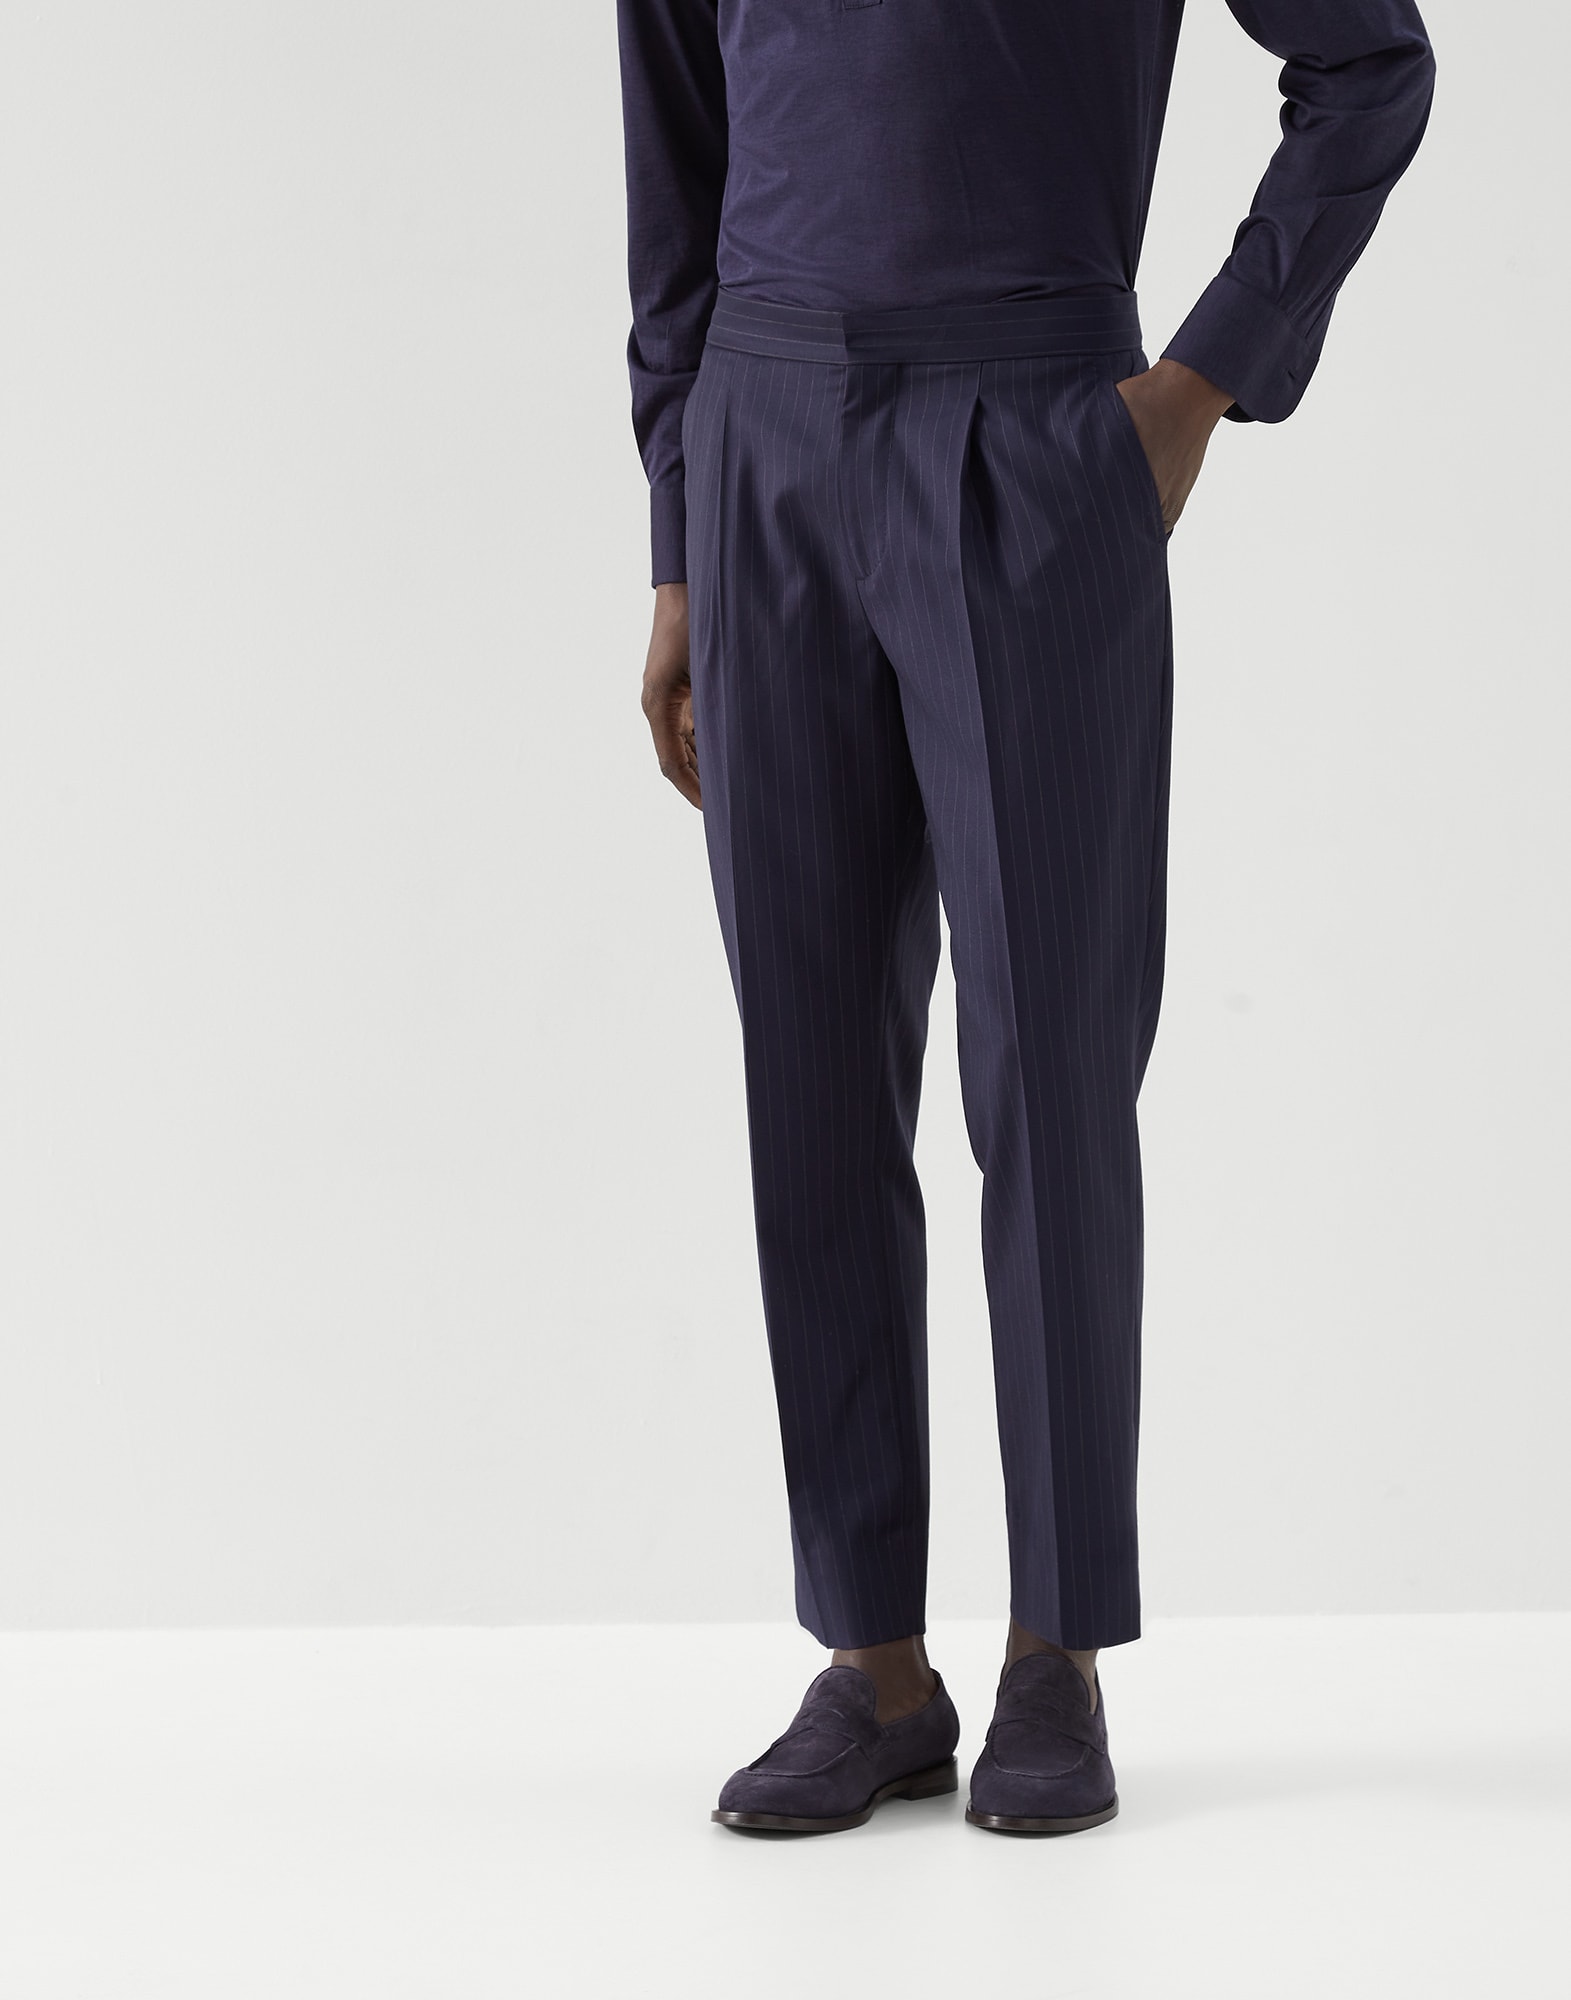 Mens Pants Tuxedos and Formal Wear  Nordstrom